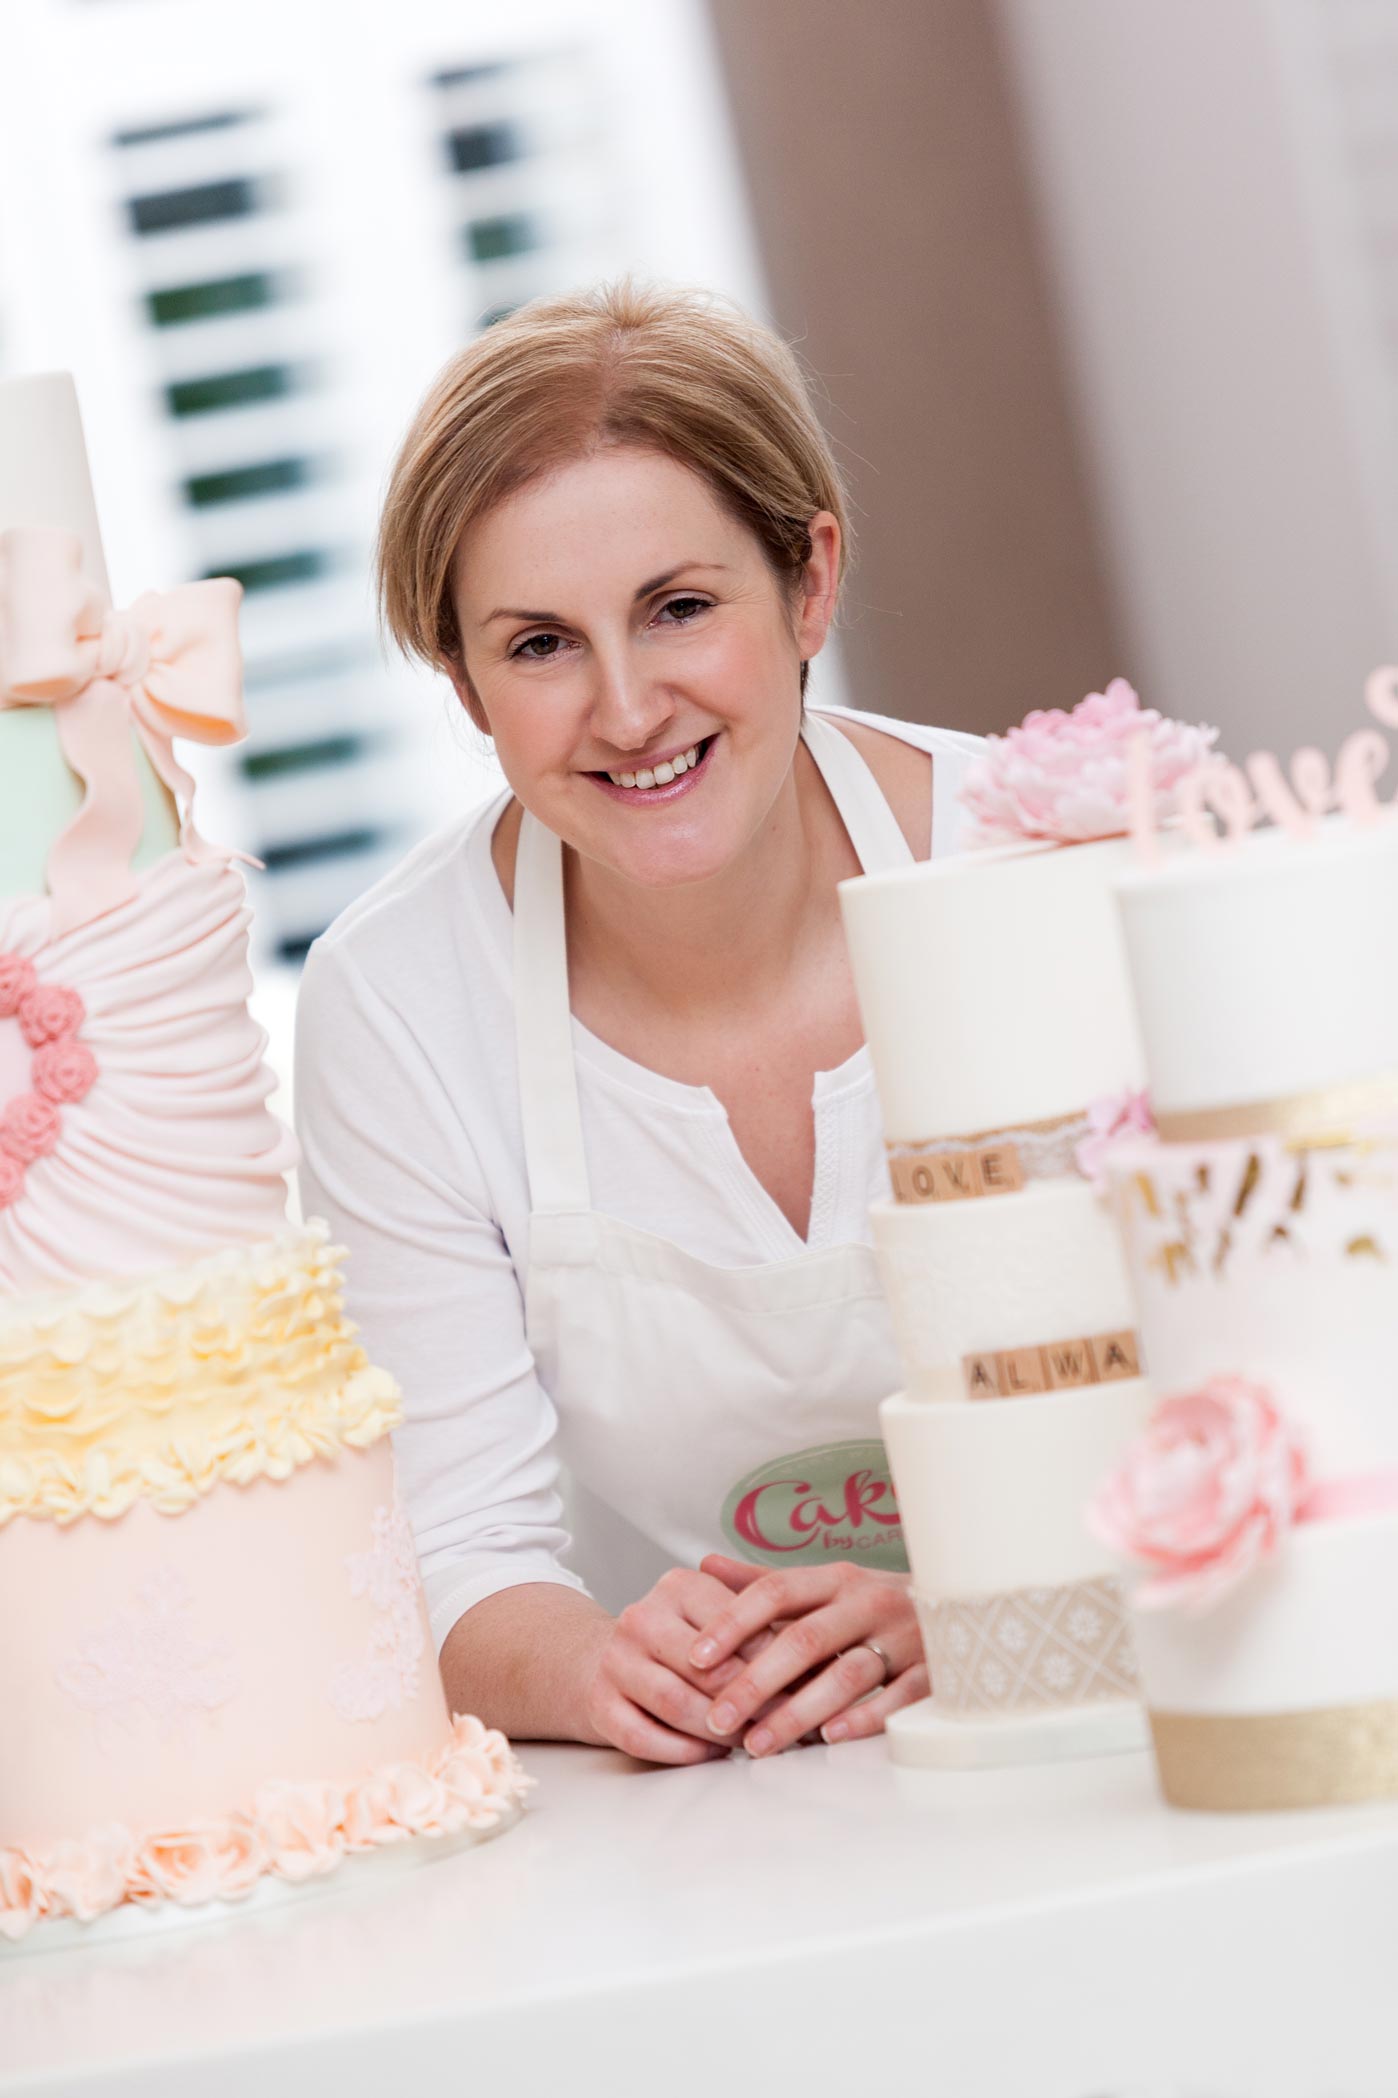 A cake makers poses with her cakes during her personal branding photography shoot in Surrey